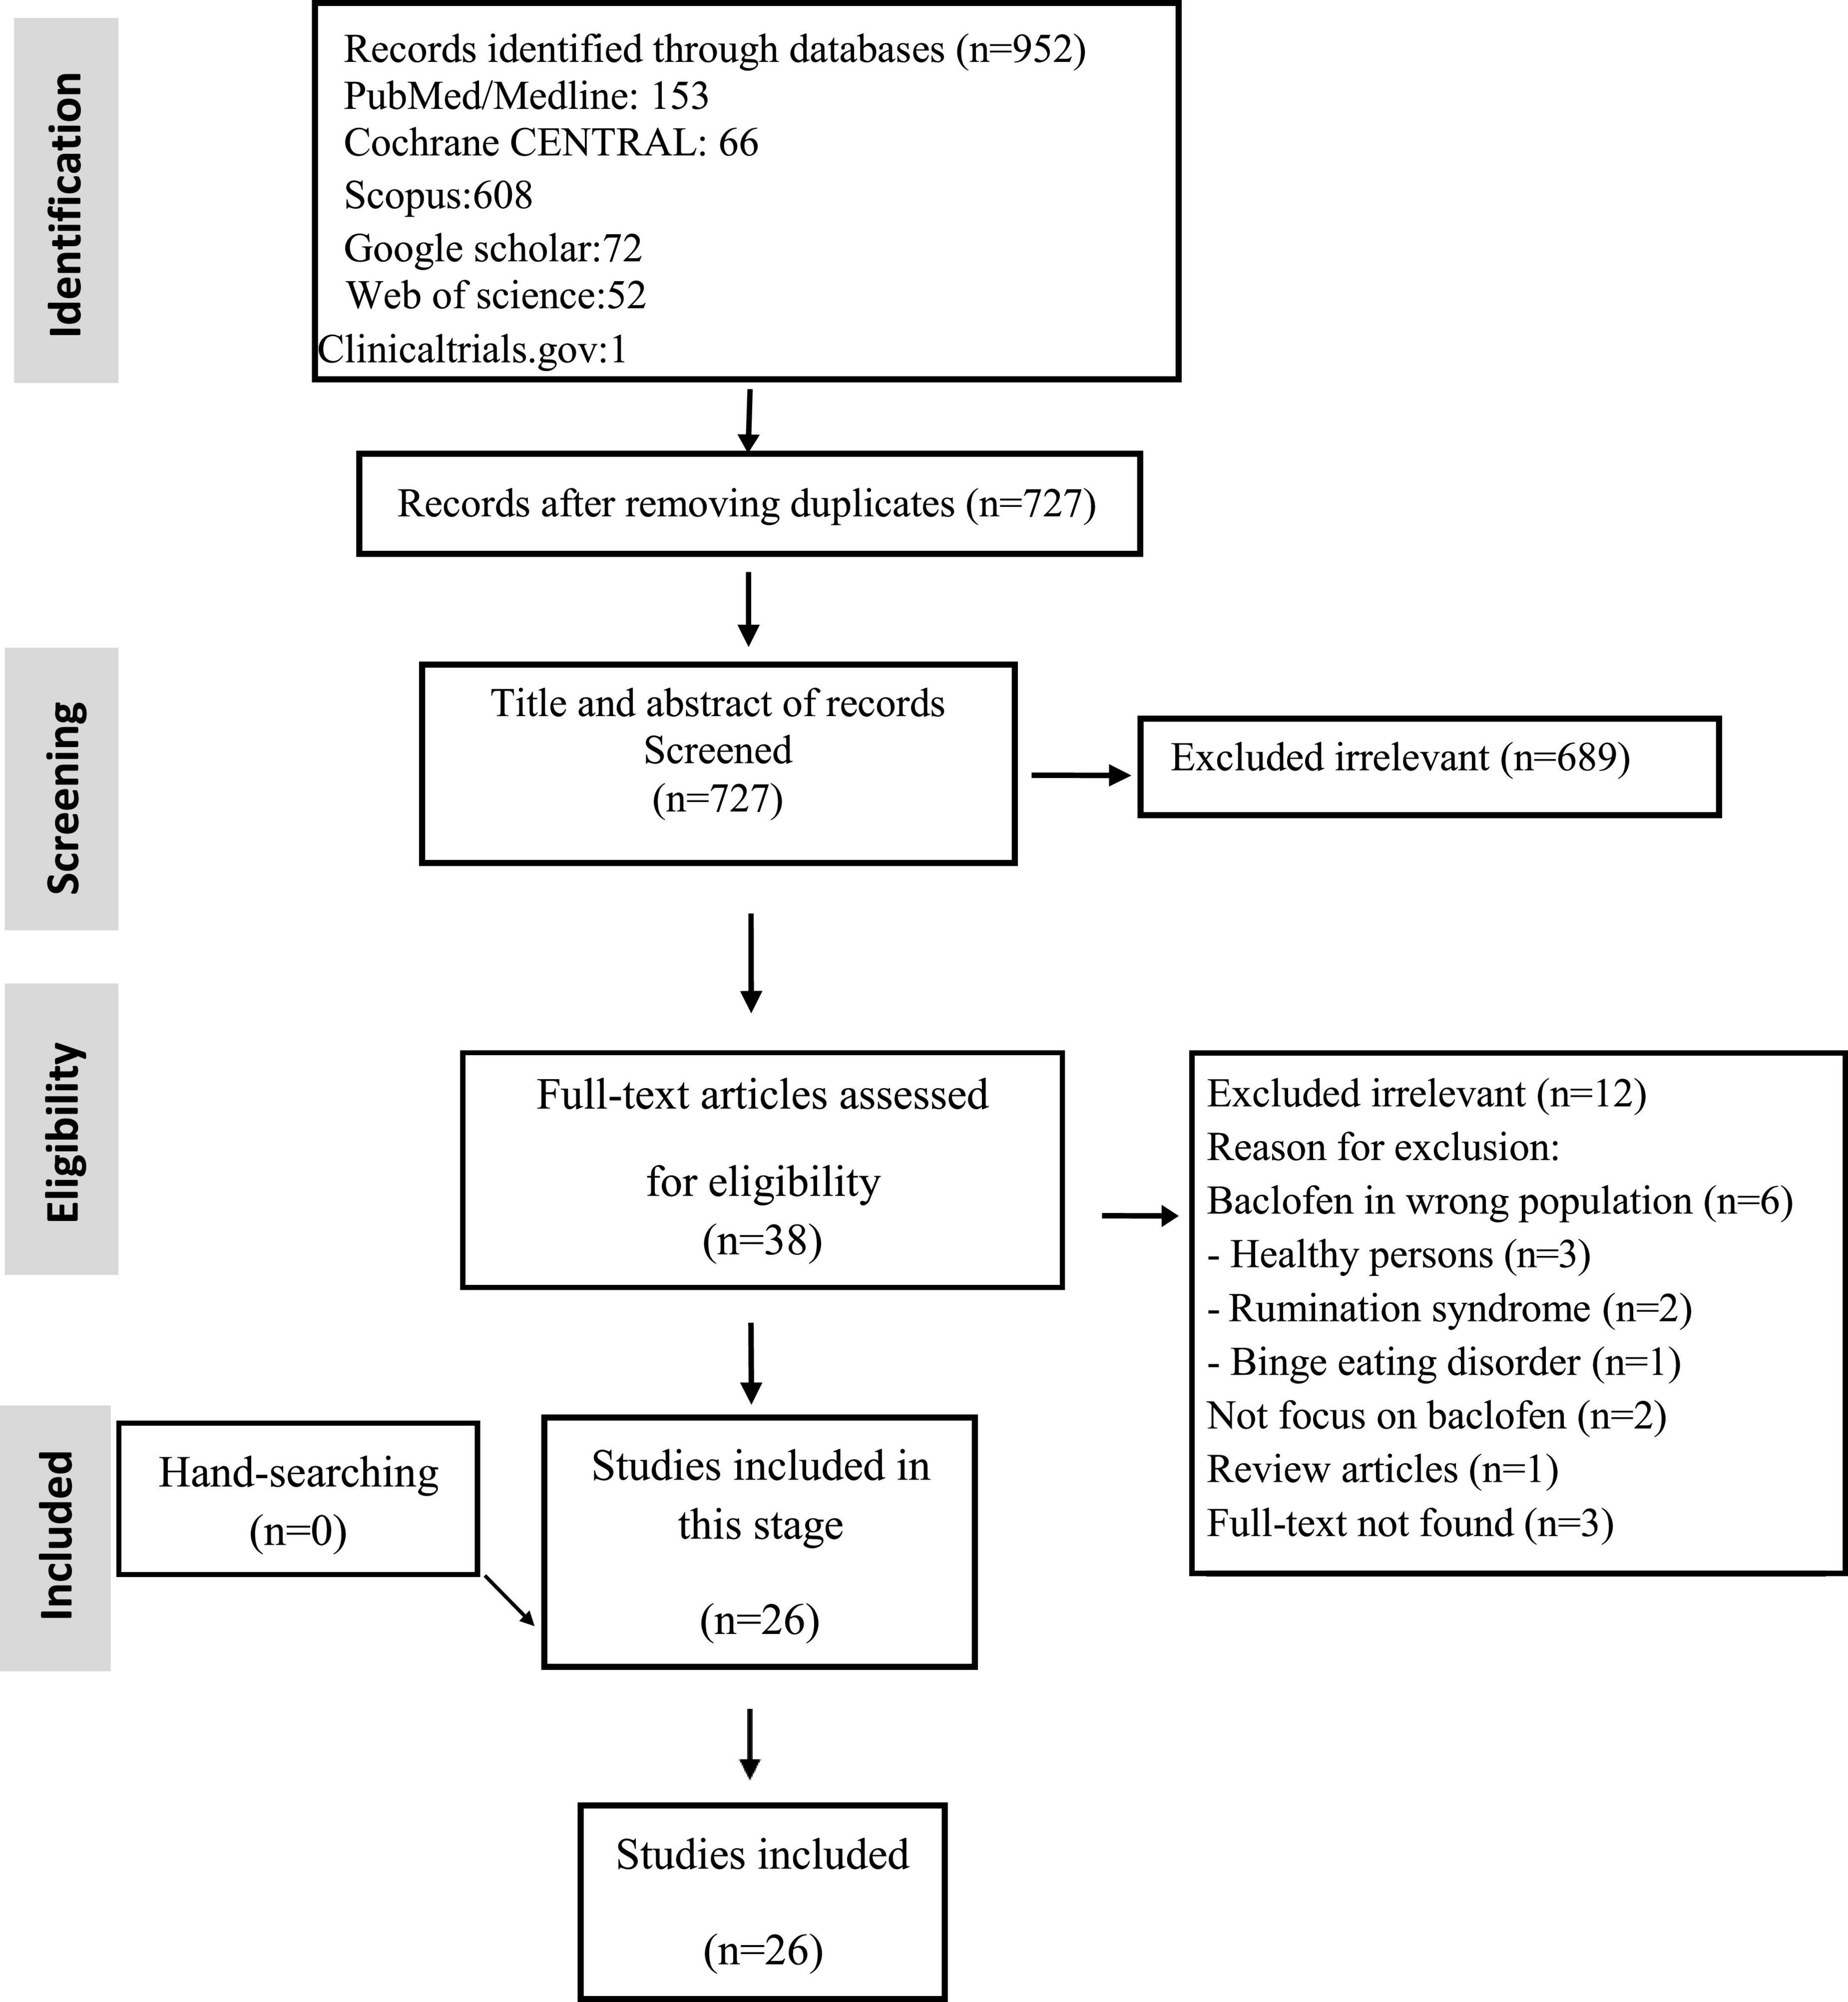 Baclofen as a therapeutic option for gastroesophageal reflux disease: A systematic review of clinical trials